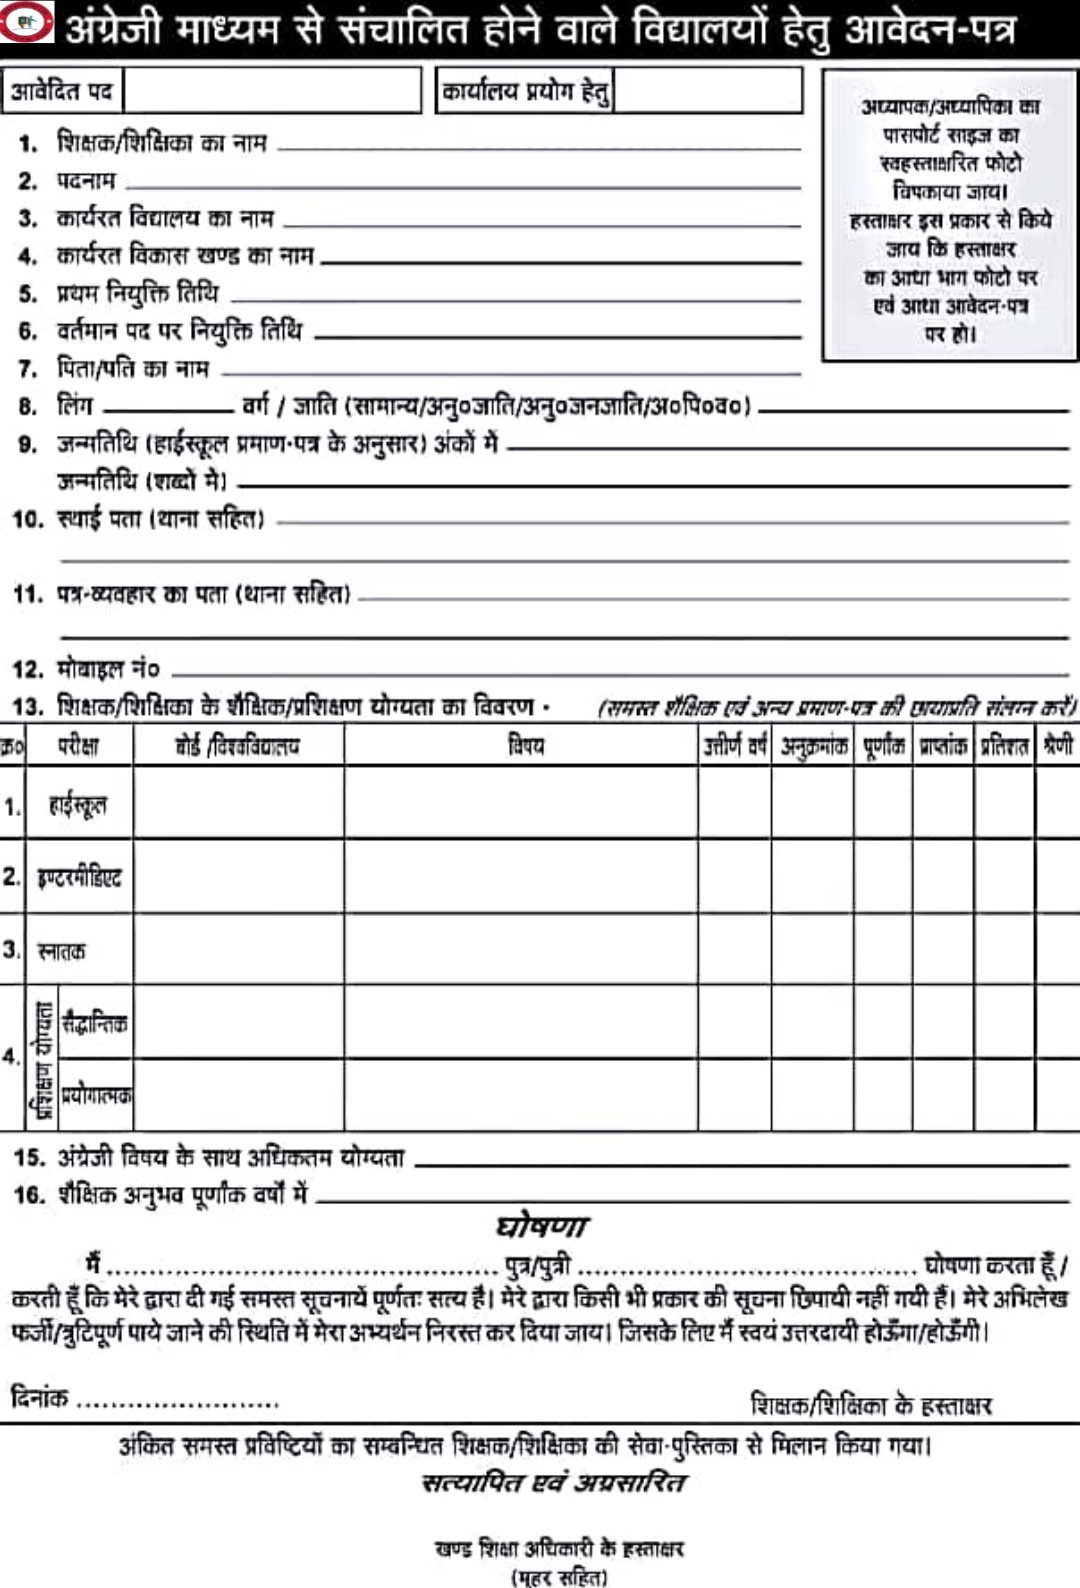 Application forms for English medium school download